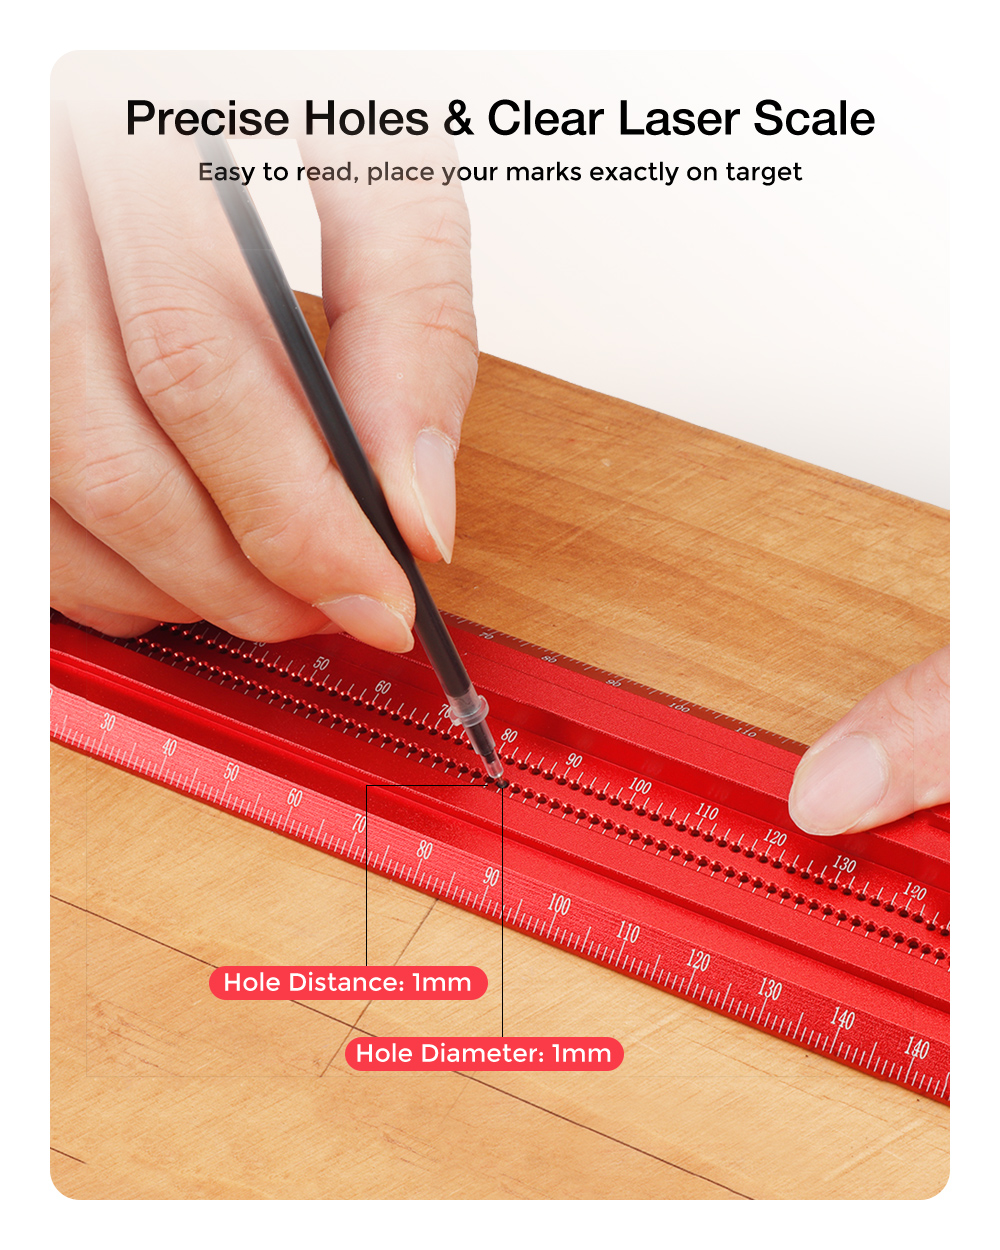 VEIKO-TS-Precision-Woodworking-Line-Scriber-Marking-T-Ruler-Aluminum-Alloy-Hole-Positioning-Marking--1879415-3